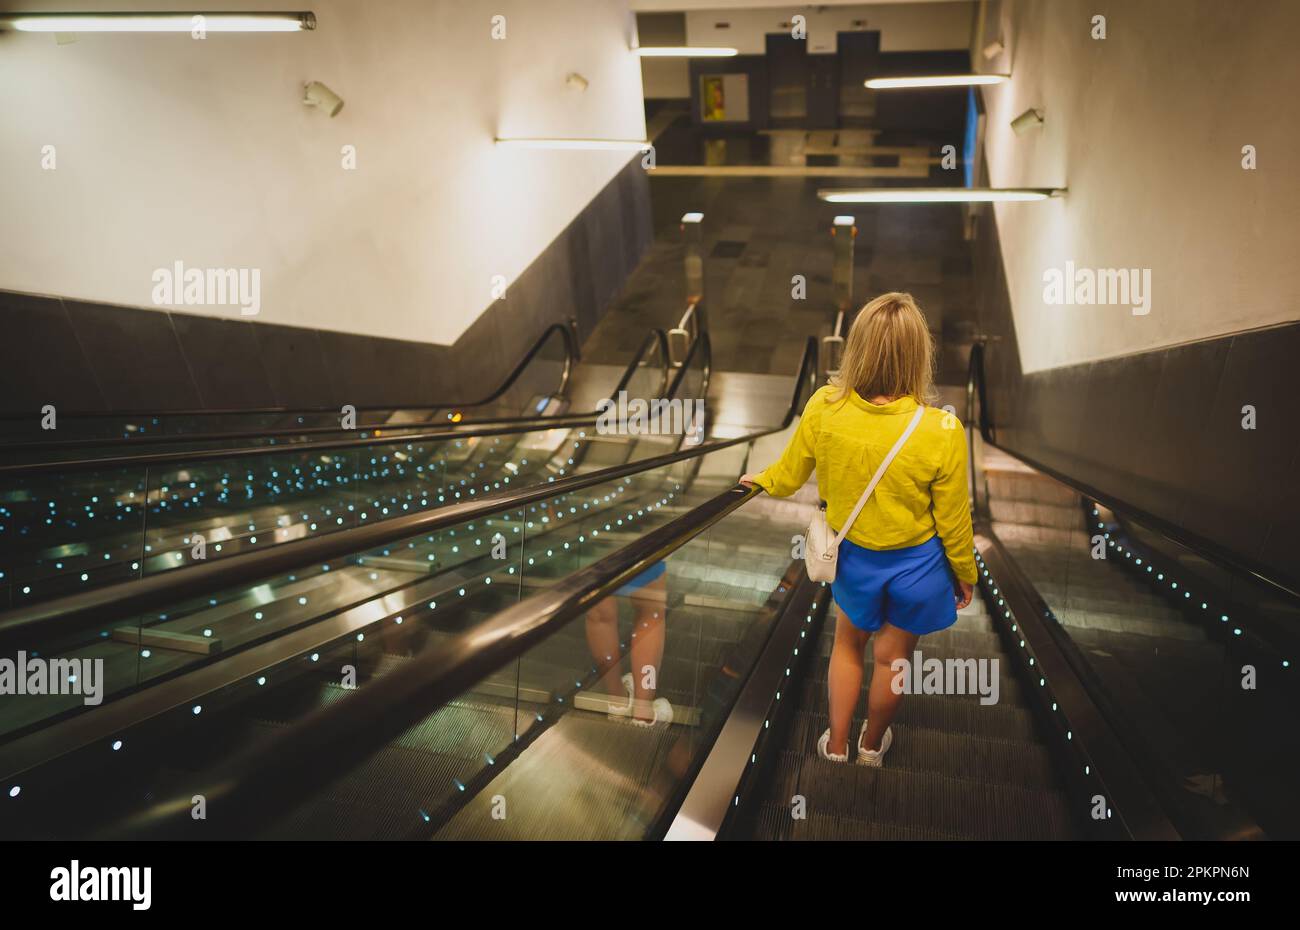 Woman using the escalator in the subway. Stock Photo